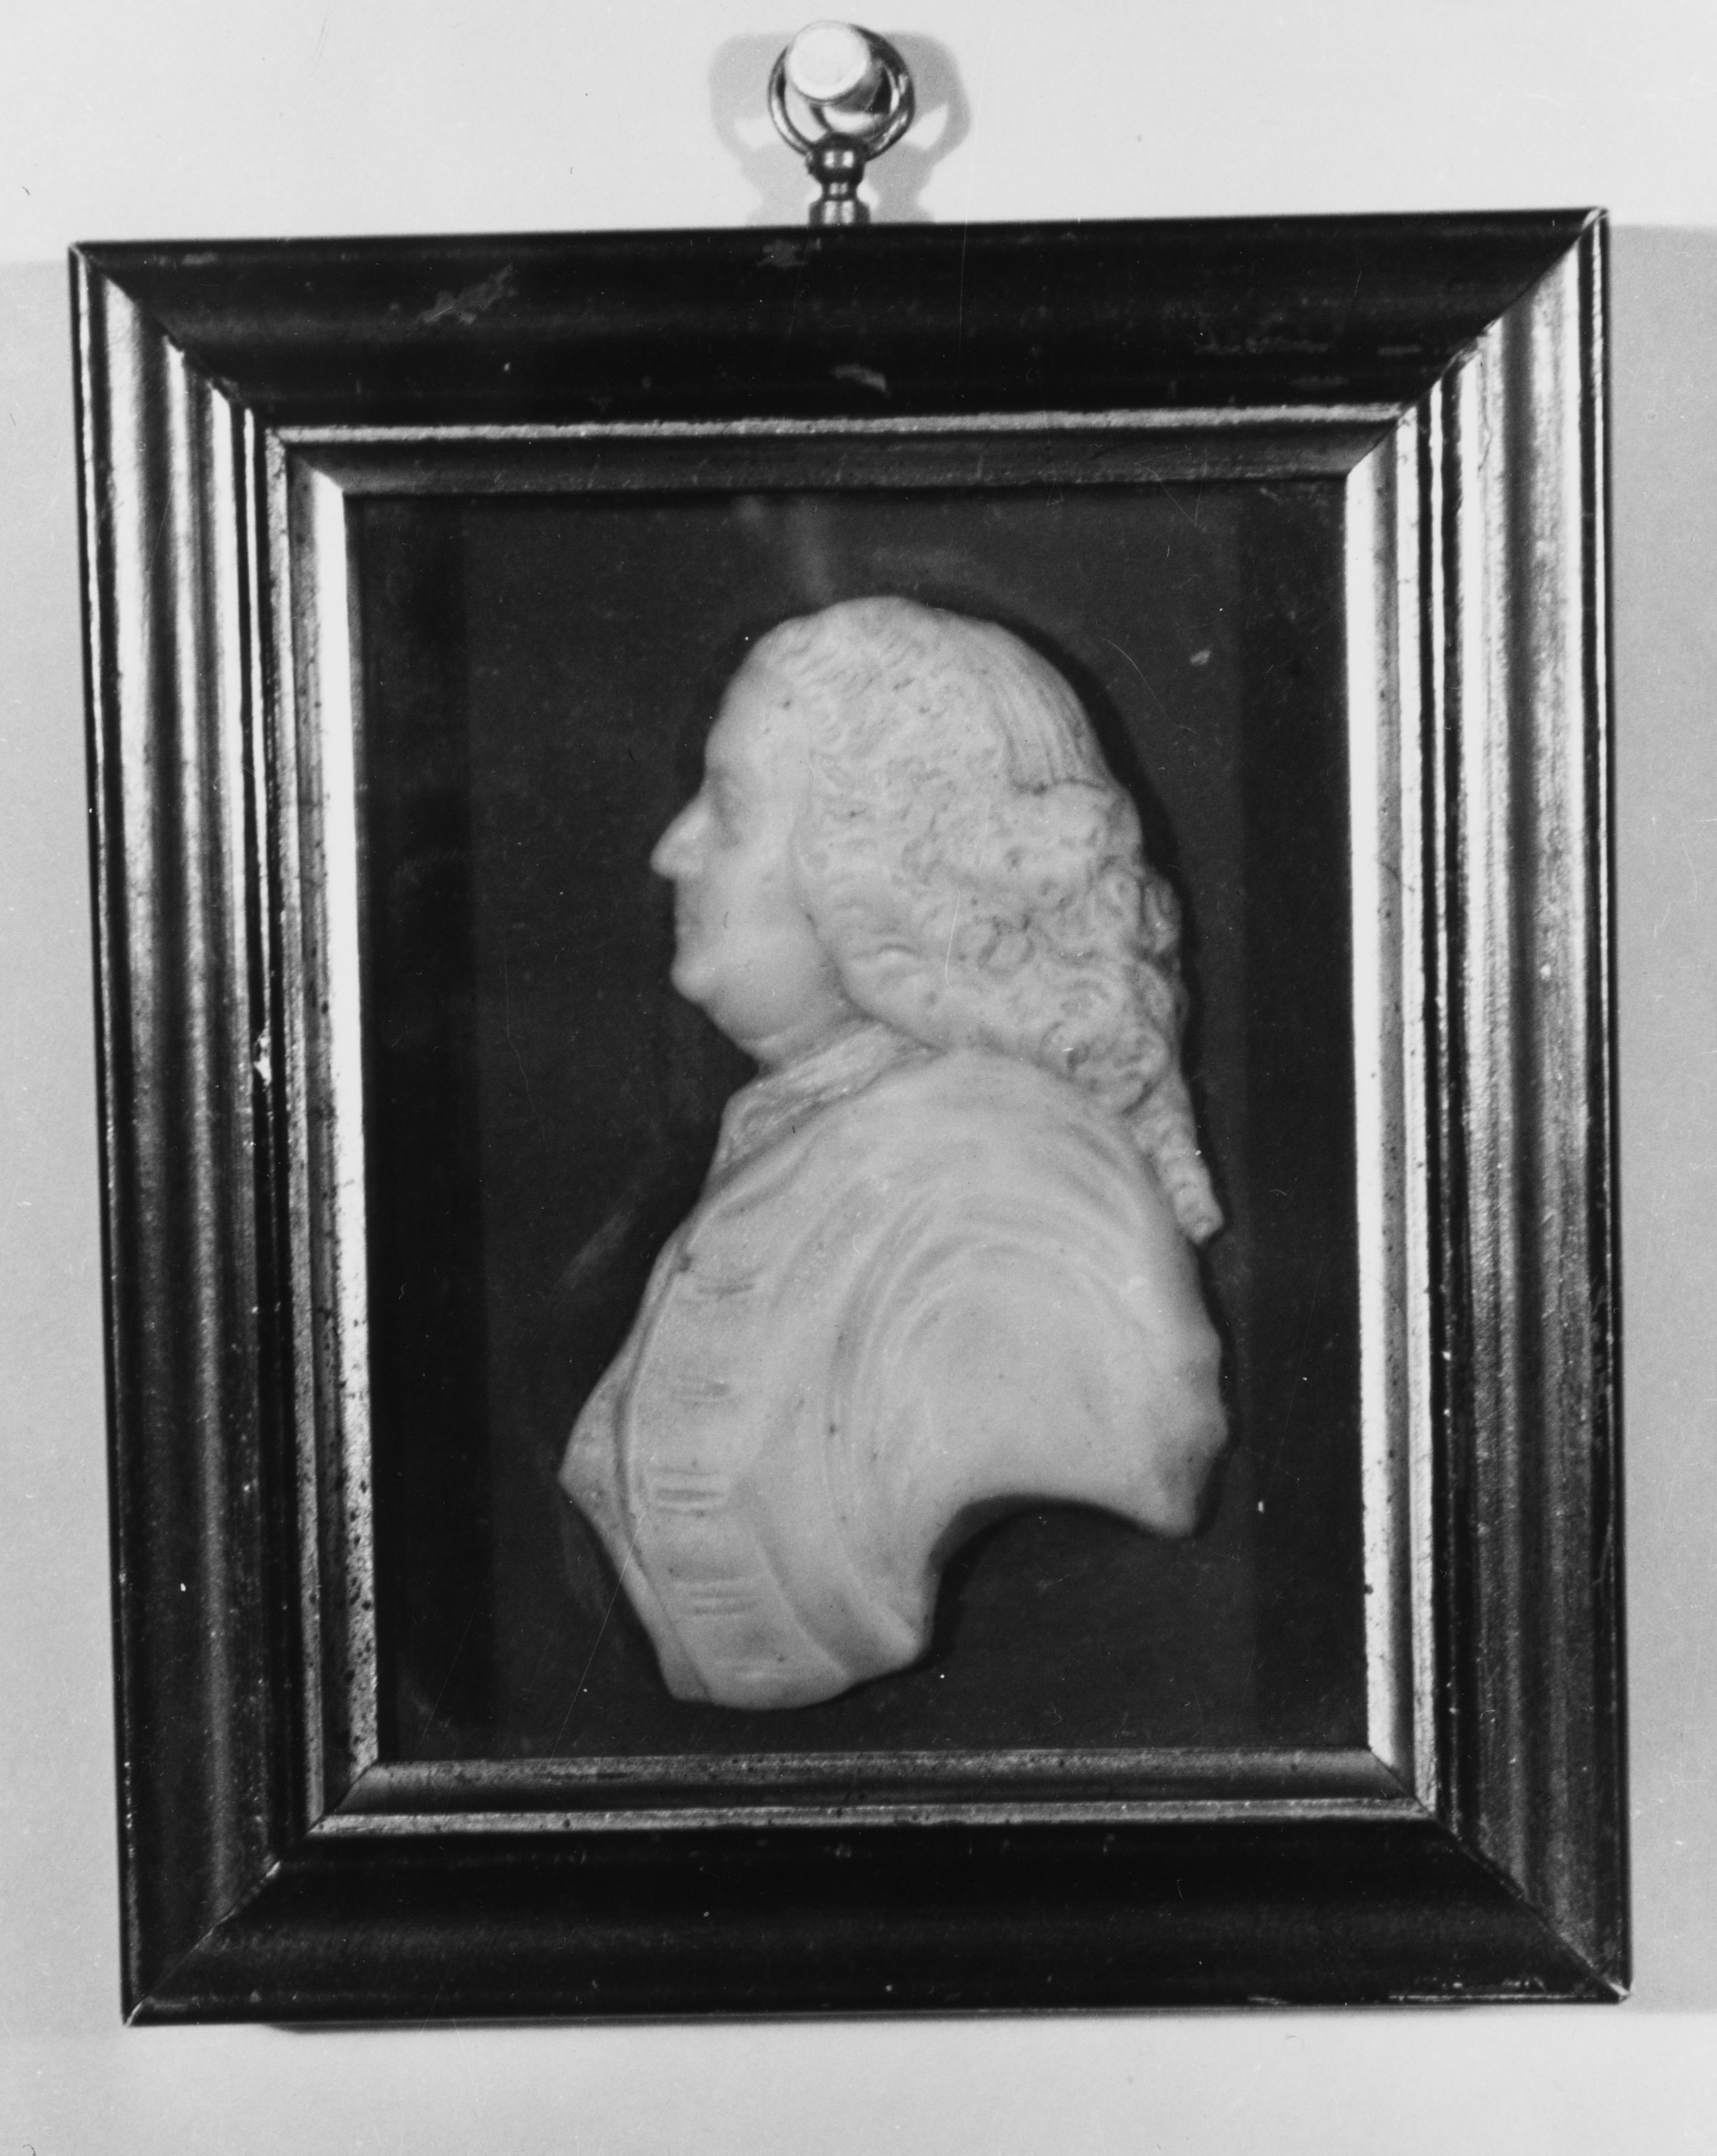 A bust-length portrait of a man in profile, modeled in relief with wax. The man looks to the left and wears a coat and an elaborate eighteenth-century wig. He appears to be middle aged.